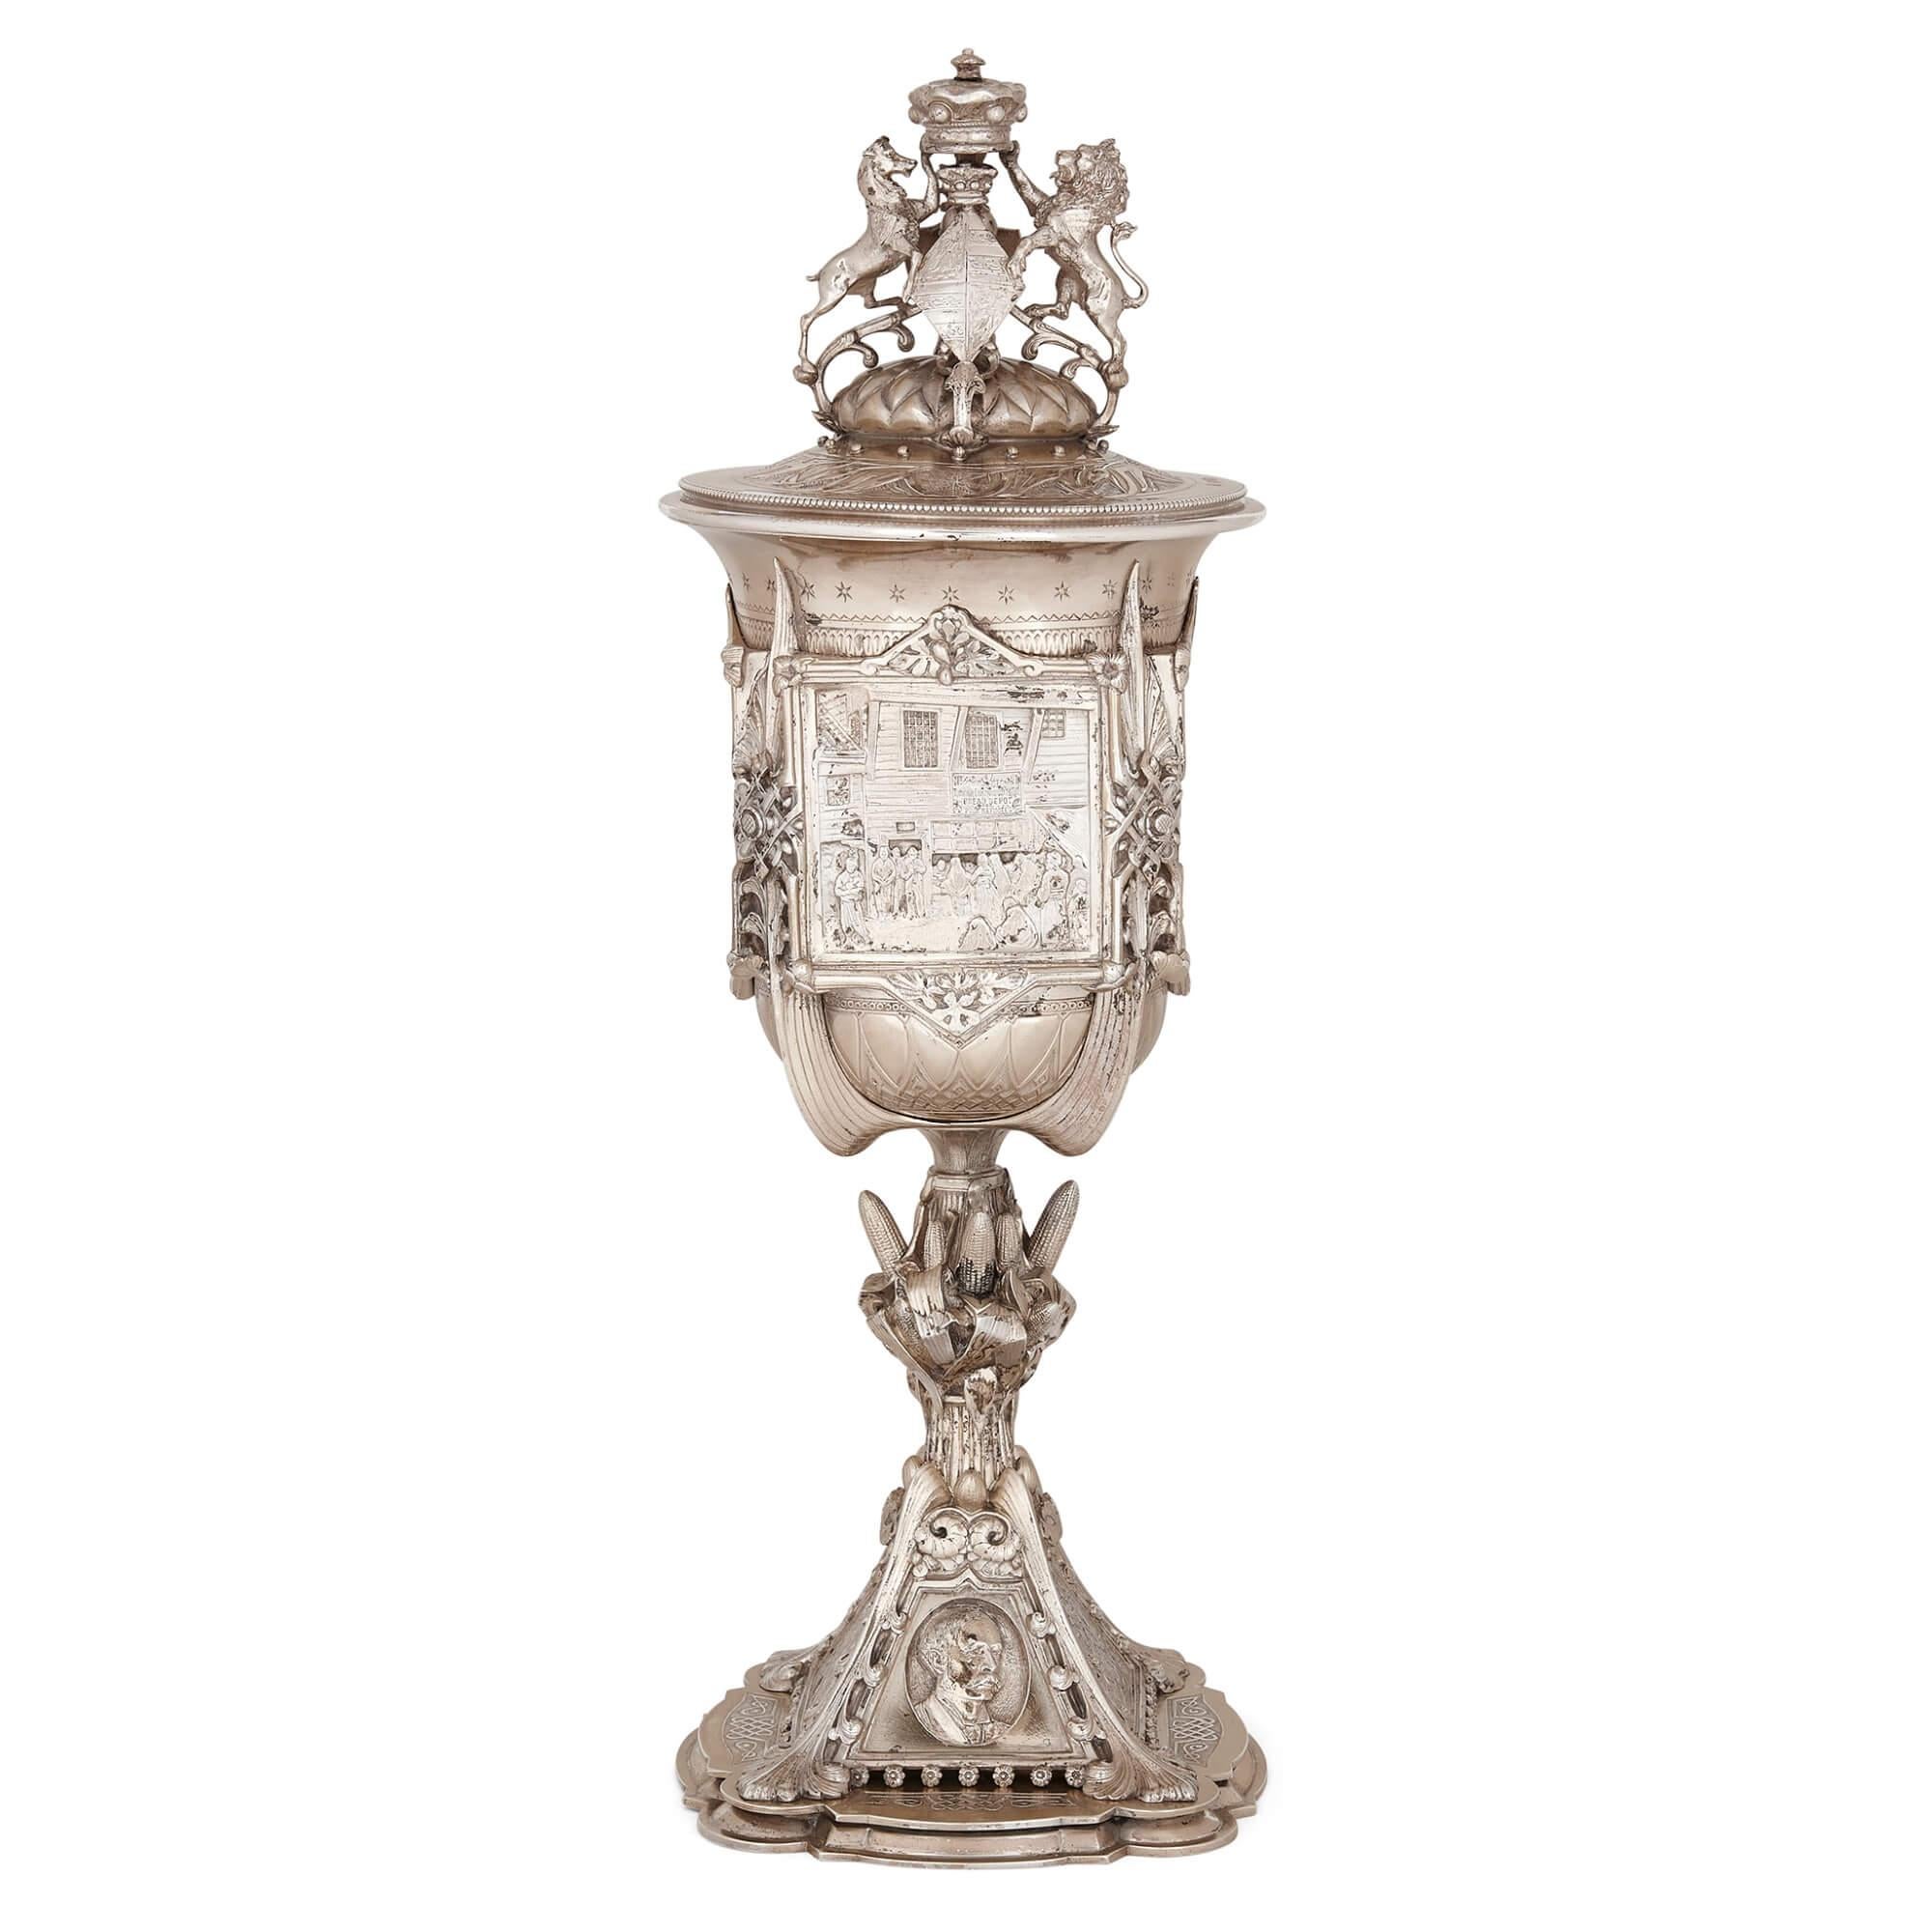 Large antique Victorian silver loving cup and cover 
English, 1881
Height 40cm, width 13.5cm, depth 13.5cm

This large antique cup and cover is a traditional ‘loving cup’, an ornamental drinking vessel used to mark significant events. Typically made